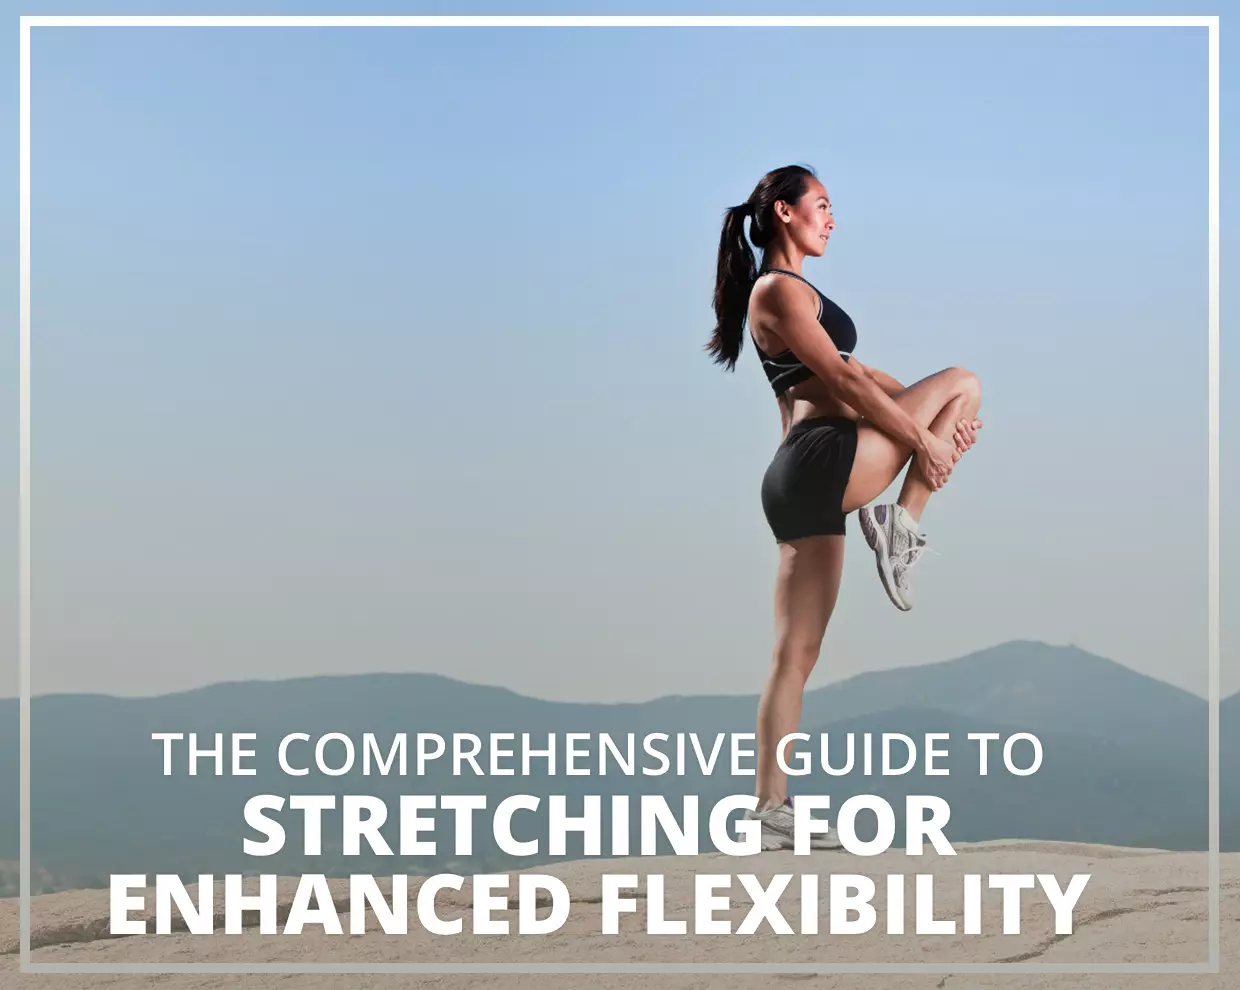 The Comprehensive Guide to Stretching for Enhanced Flexibility